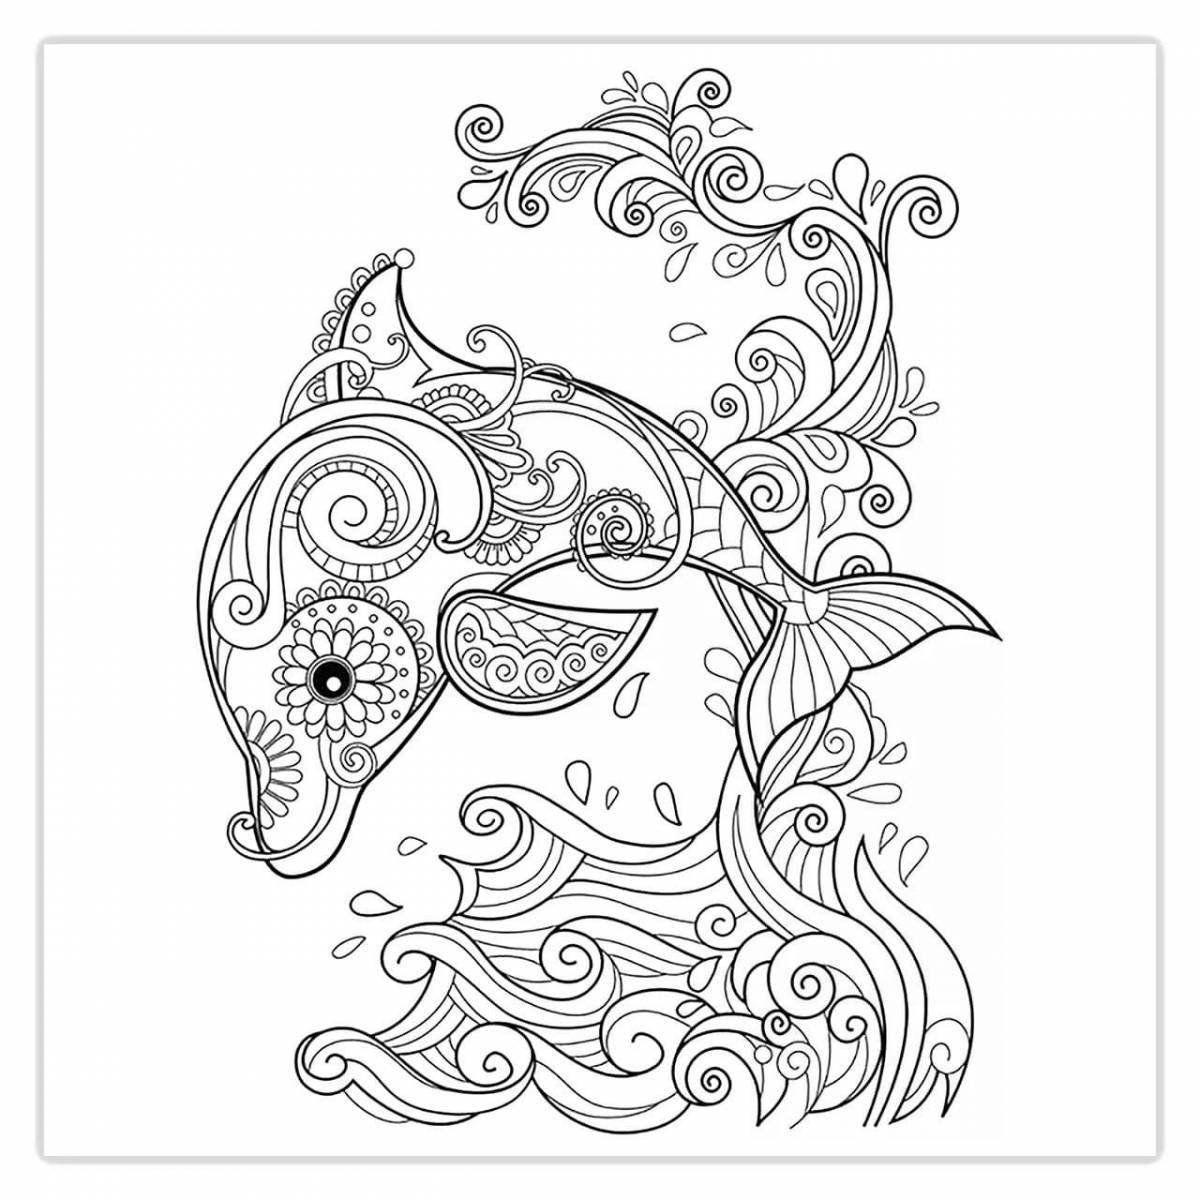 Radiant coloring page relax для детей